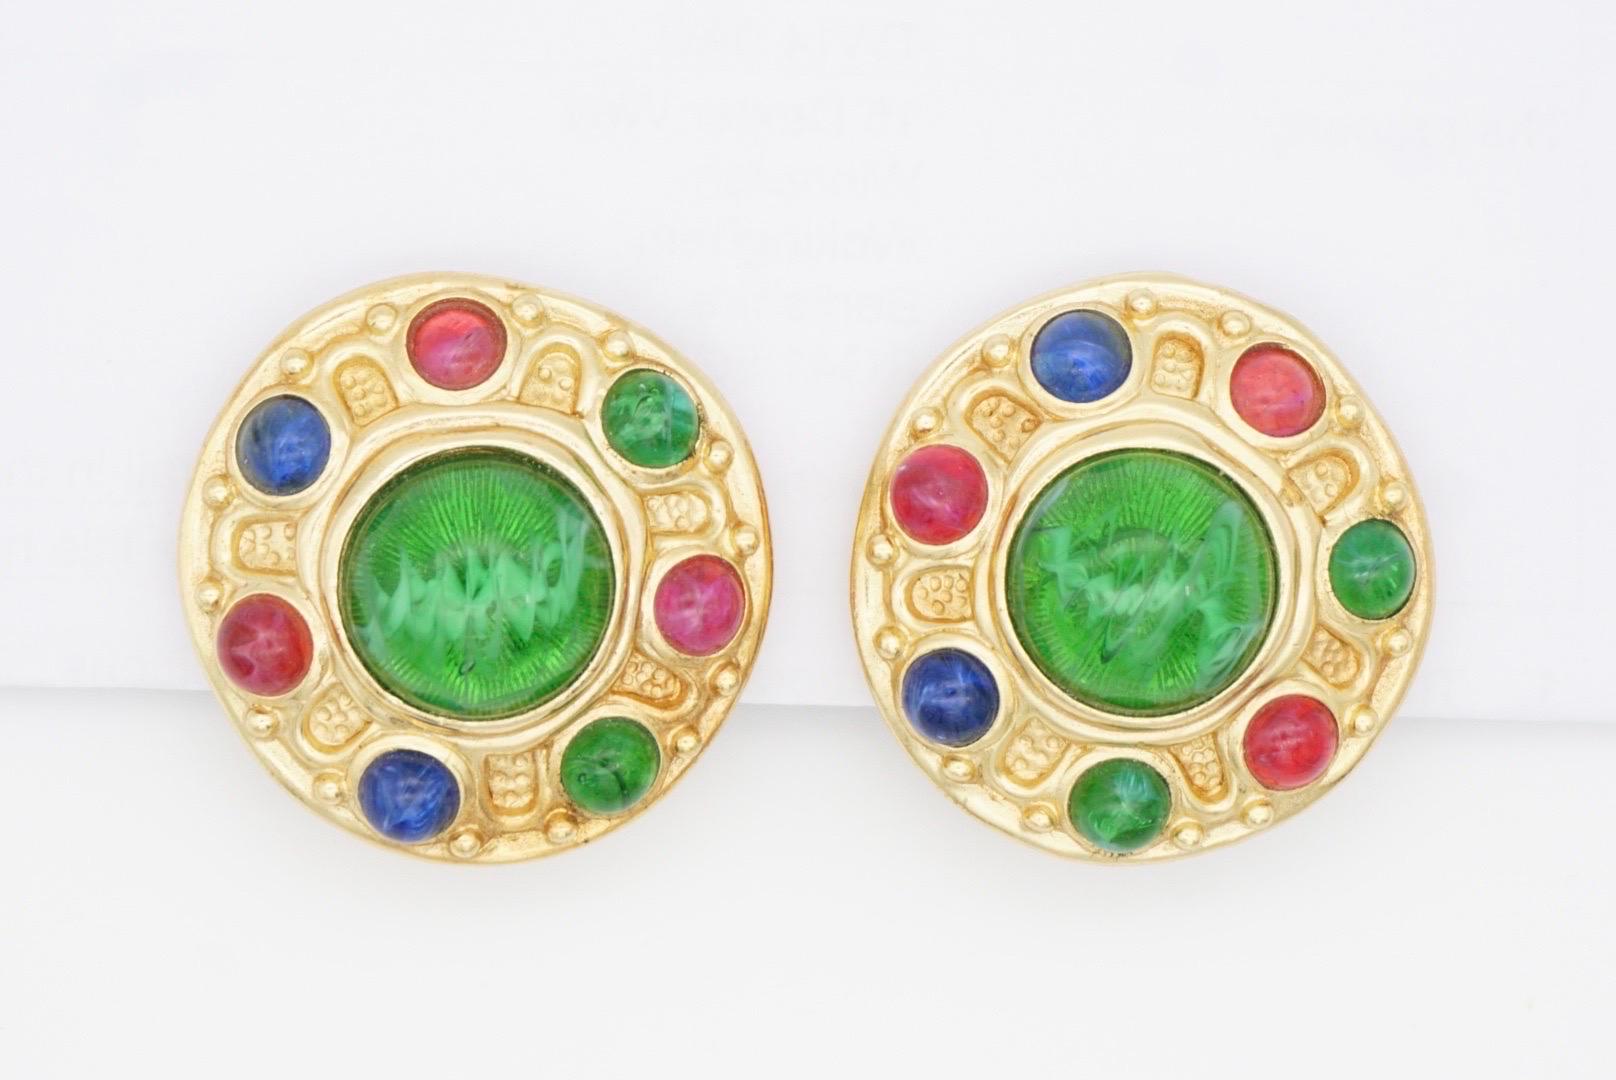 Christian Dior Vintage 1970s Baroque Large Gripoix  Emerald Sapphire Ruby Cabochon Abnormal Round Exquisite Clip Earrings, Gold Tone

Very excellent condition. Vintage and rare to find. 100% Genuine.

A very beautiful pair of clip on earrings by